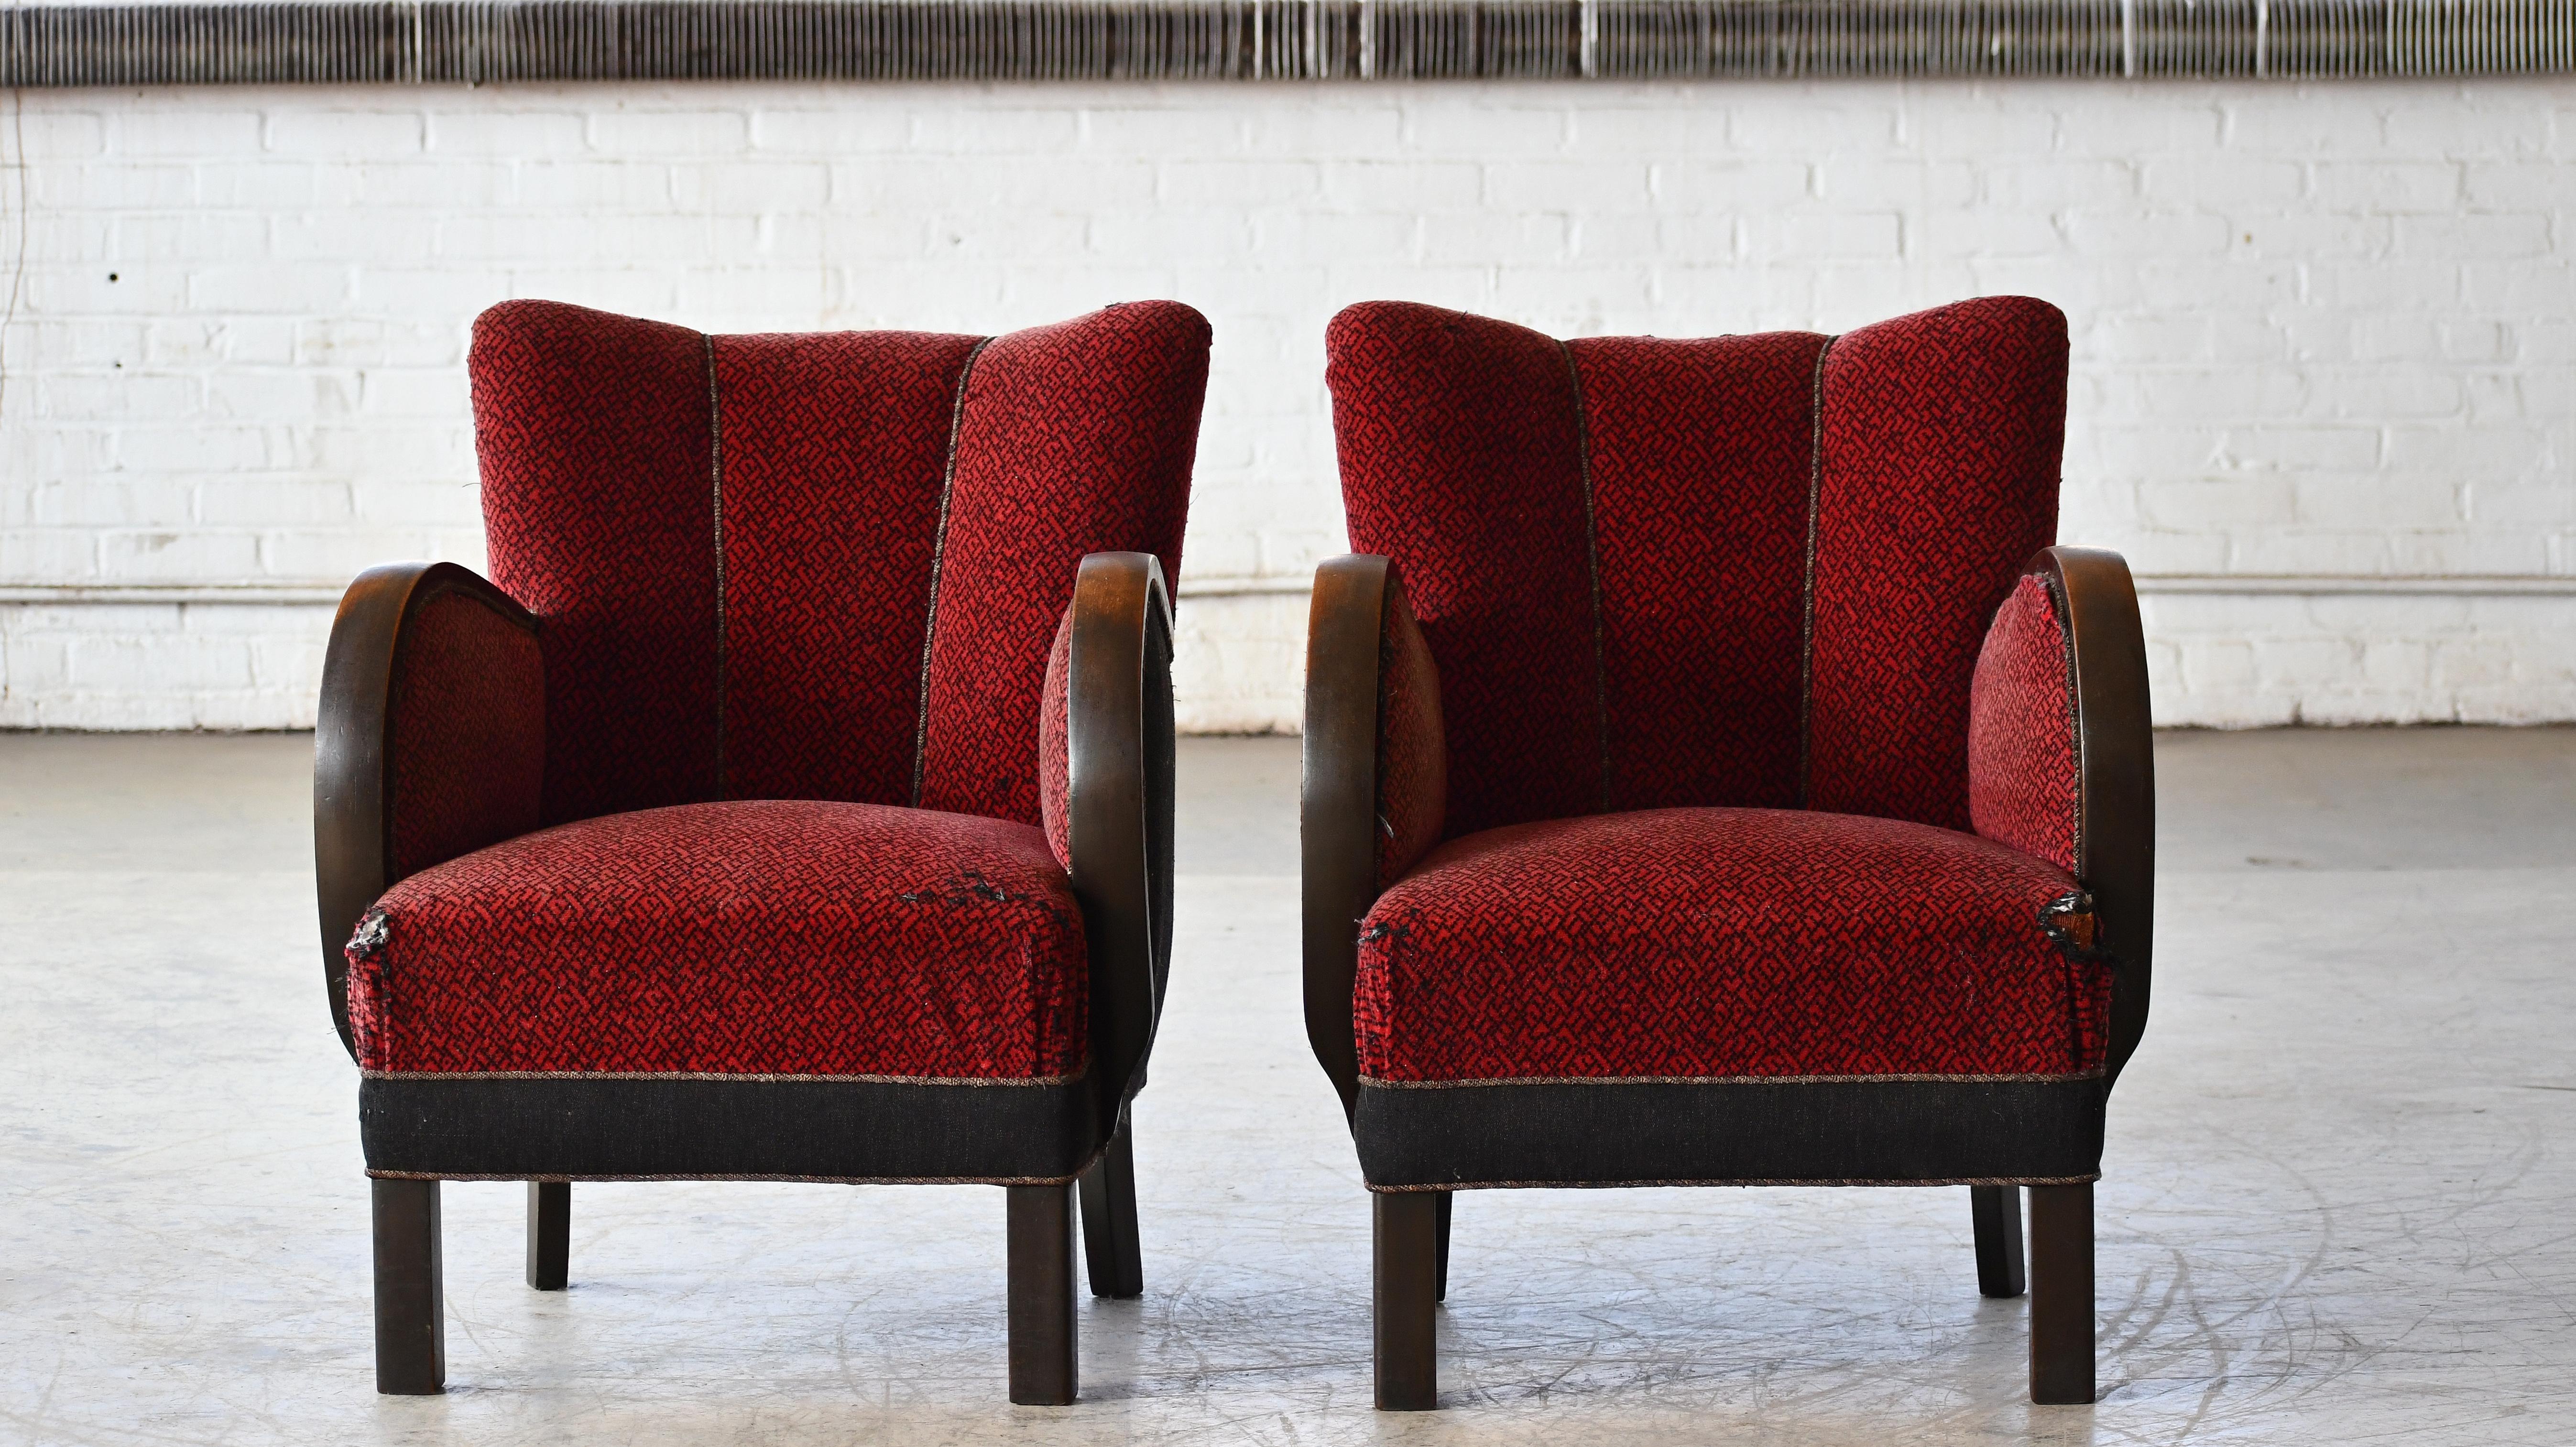 Mid-20th Century Pair of Danish Early Midcentury or Art Deco Low Lounge Chairs 1930-40s For Sale